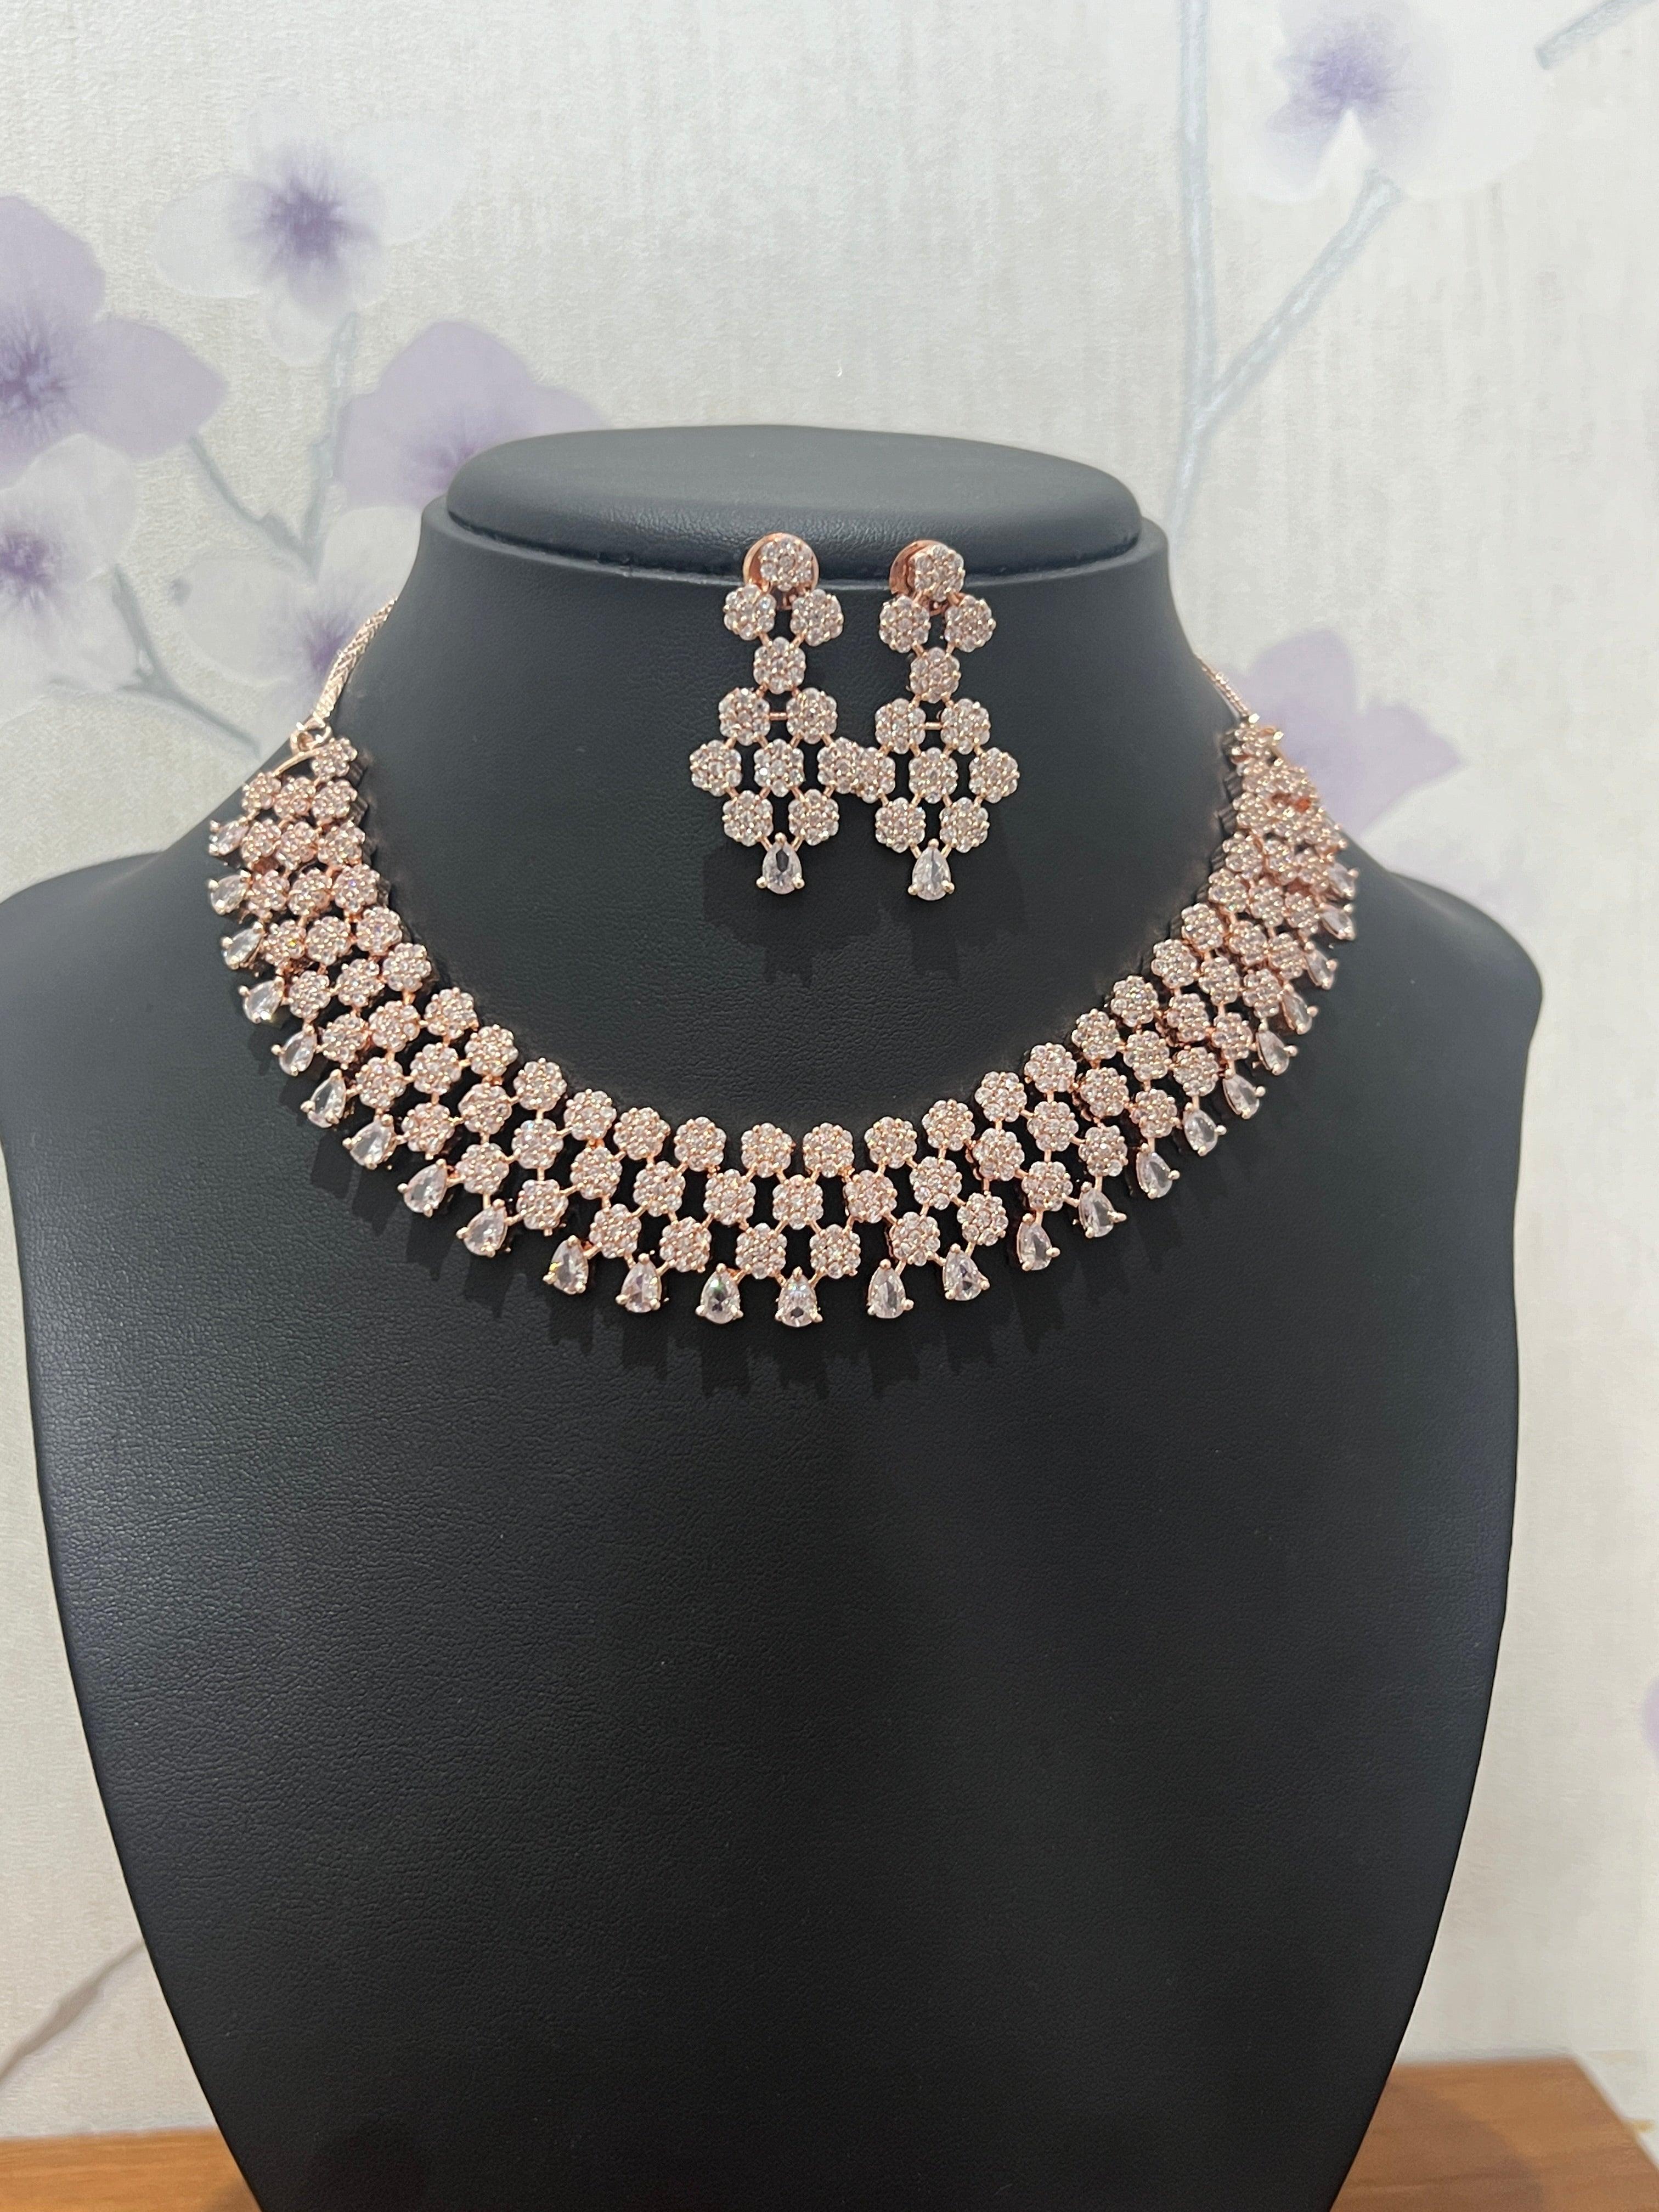 Rose Gold American Diamond Necklace Set with Flower Pattern - Boutique Nepal